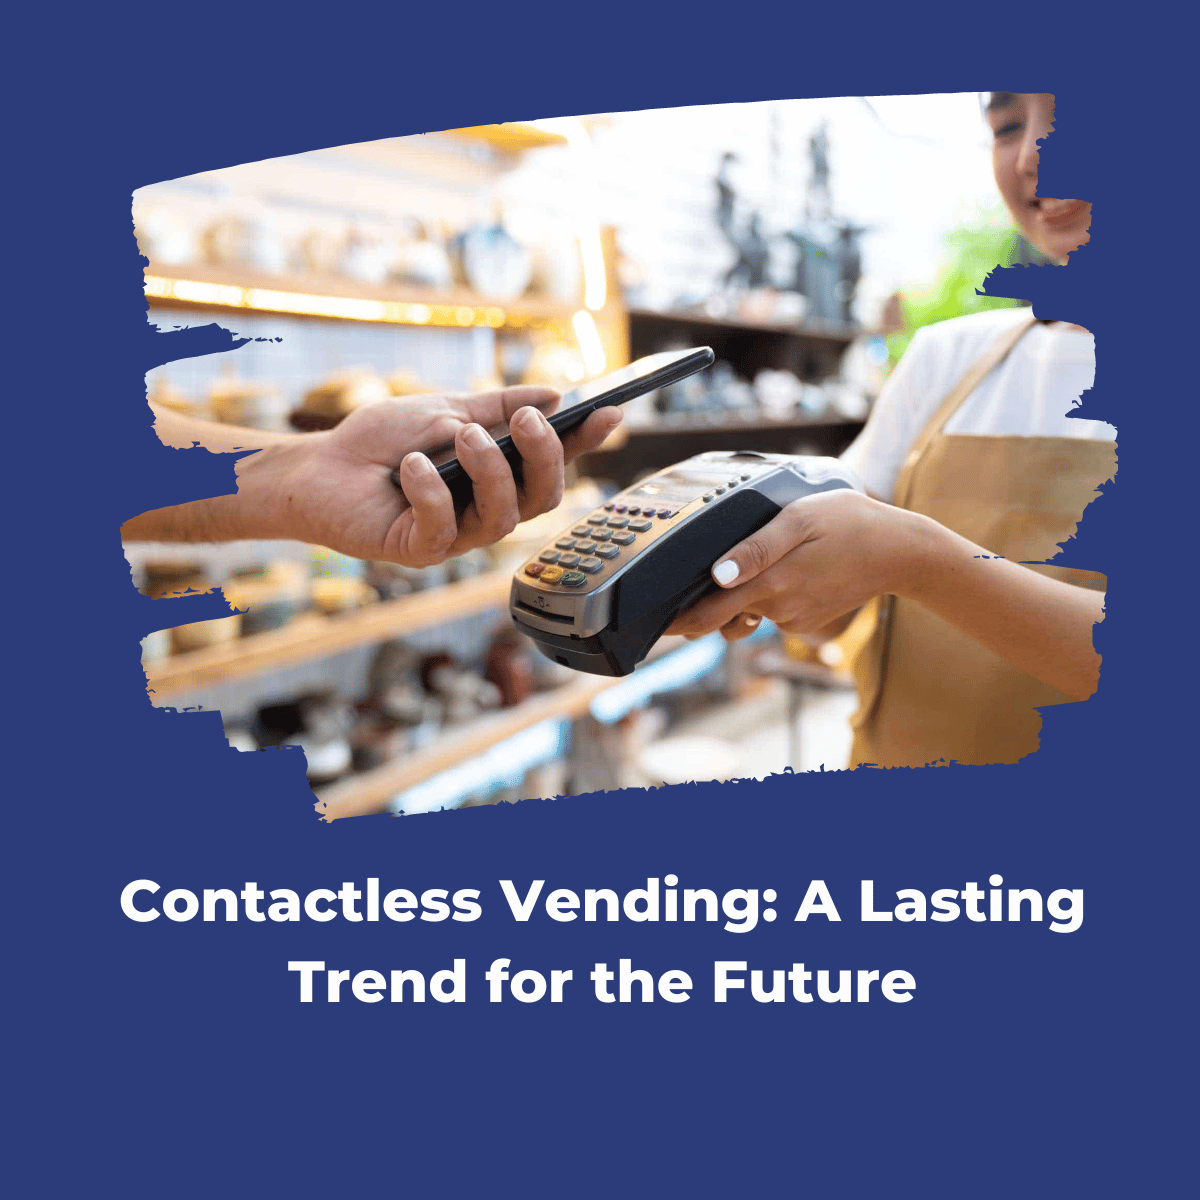 5 REASONS WHY CONTACTLESS VENDING IS HERE TO STAY FOR THE LONG TERM